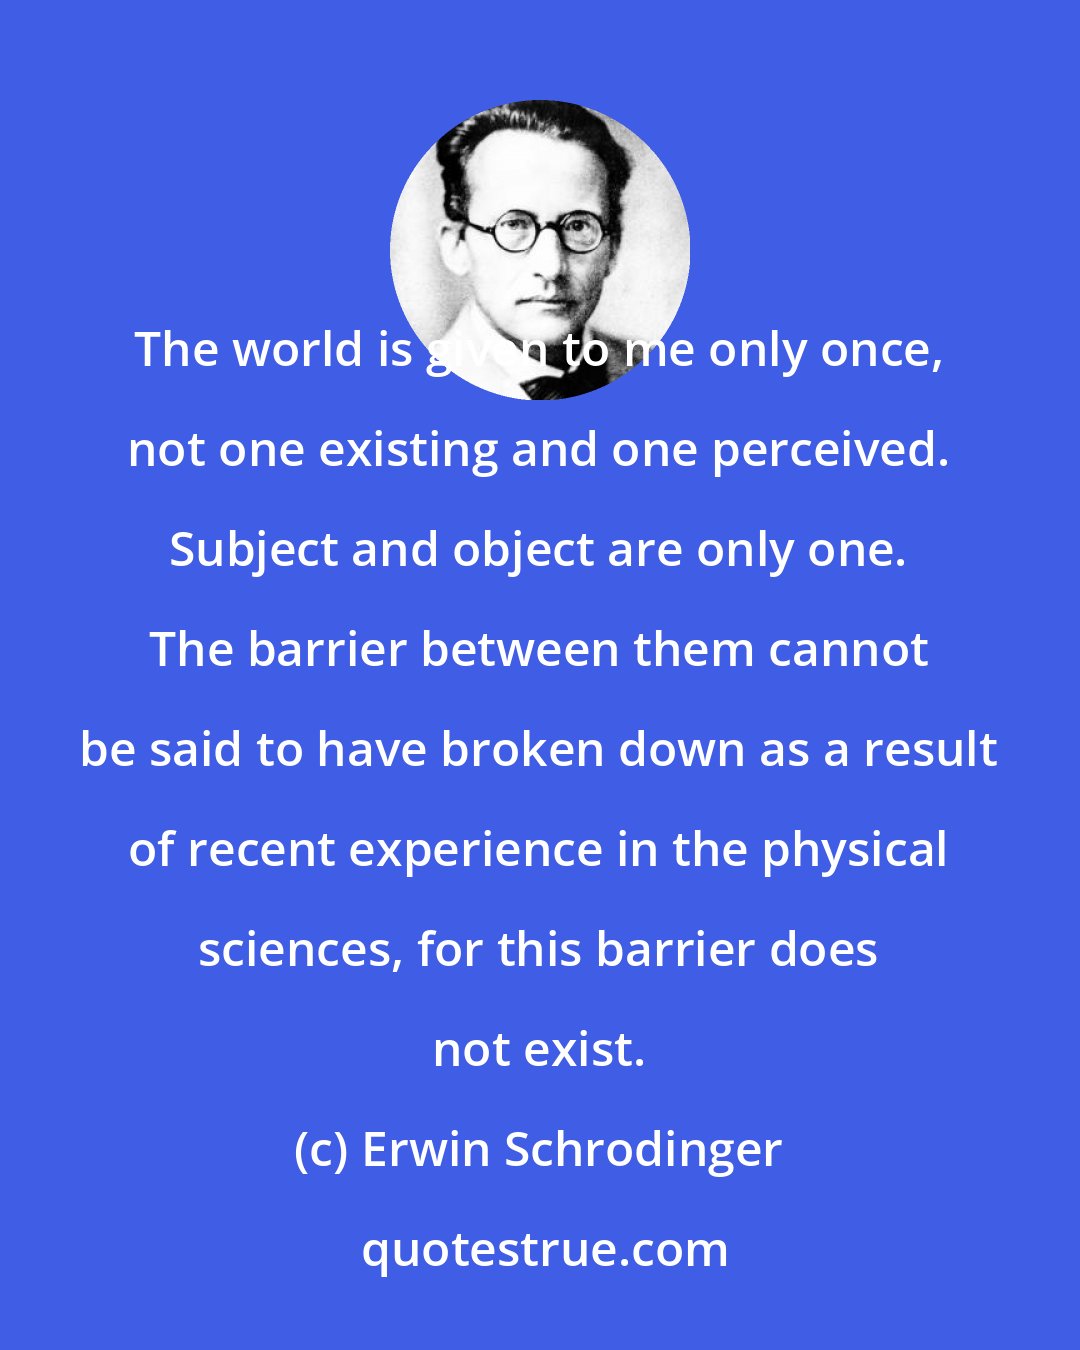 Erwin Schrodinger: The world is given to me only once, not one existing and one perceived. Subject and object are only one. The barrier between them cannot be said to have broken down as a result of recent experience in the physical sciences, for this barrier does not exist.